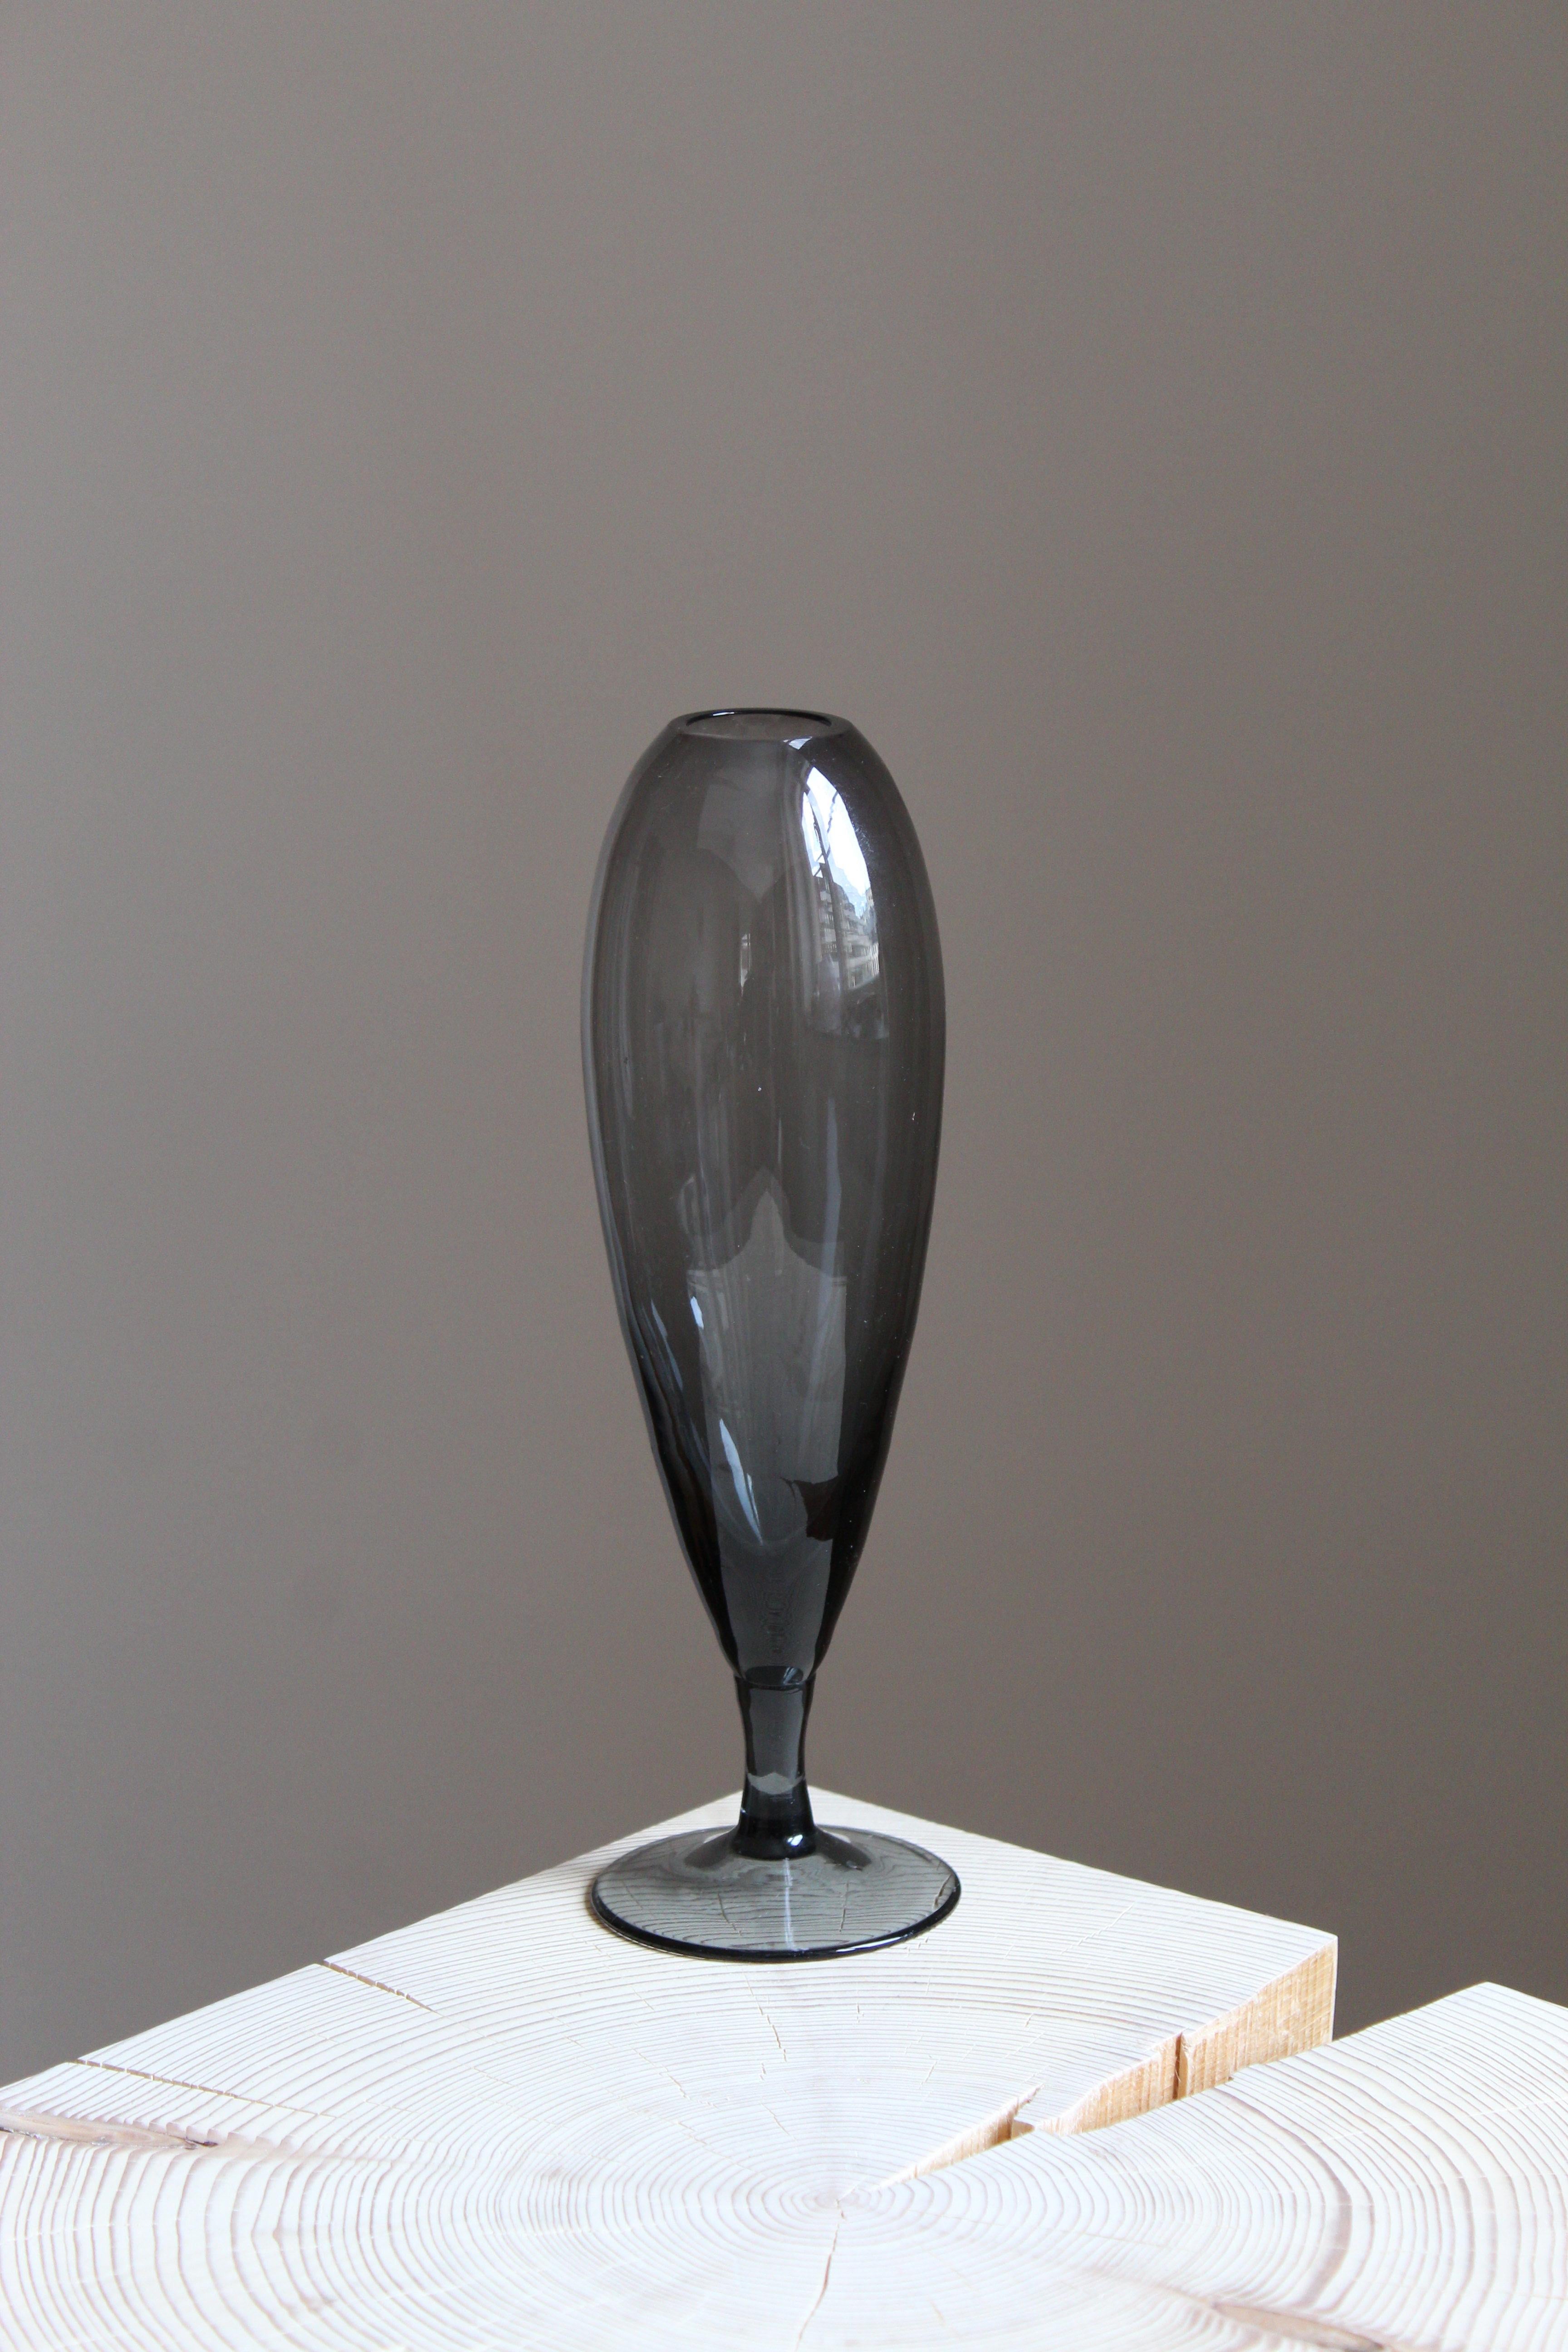 A vase / vessel. Designed by Wilhelm Wagenfeld. Produced by WMF, Germany, c. 1950s.
    
 